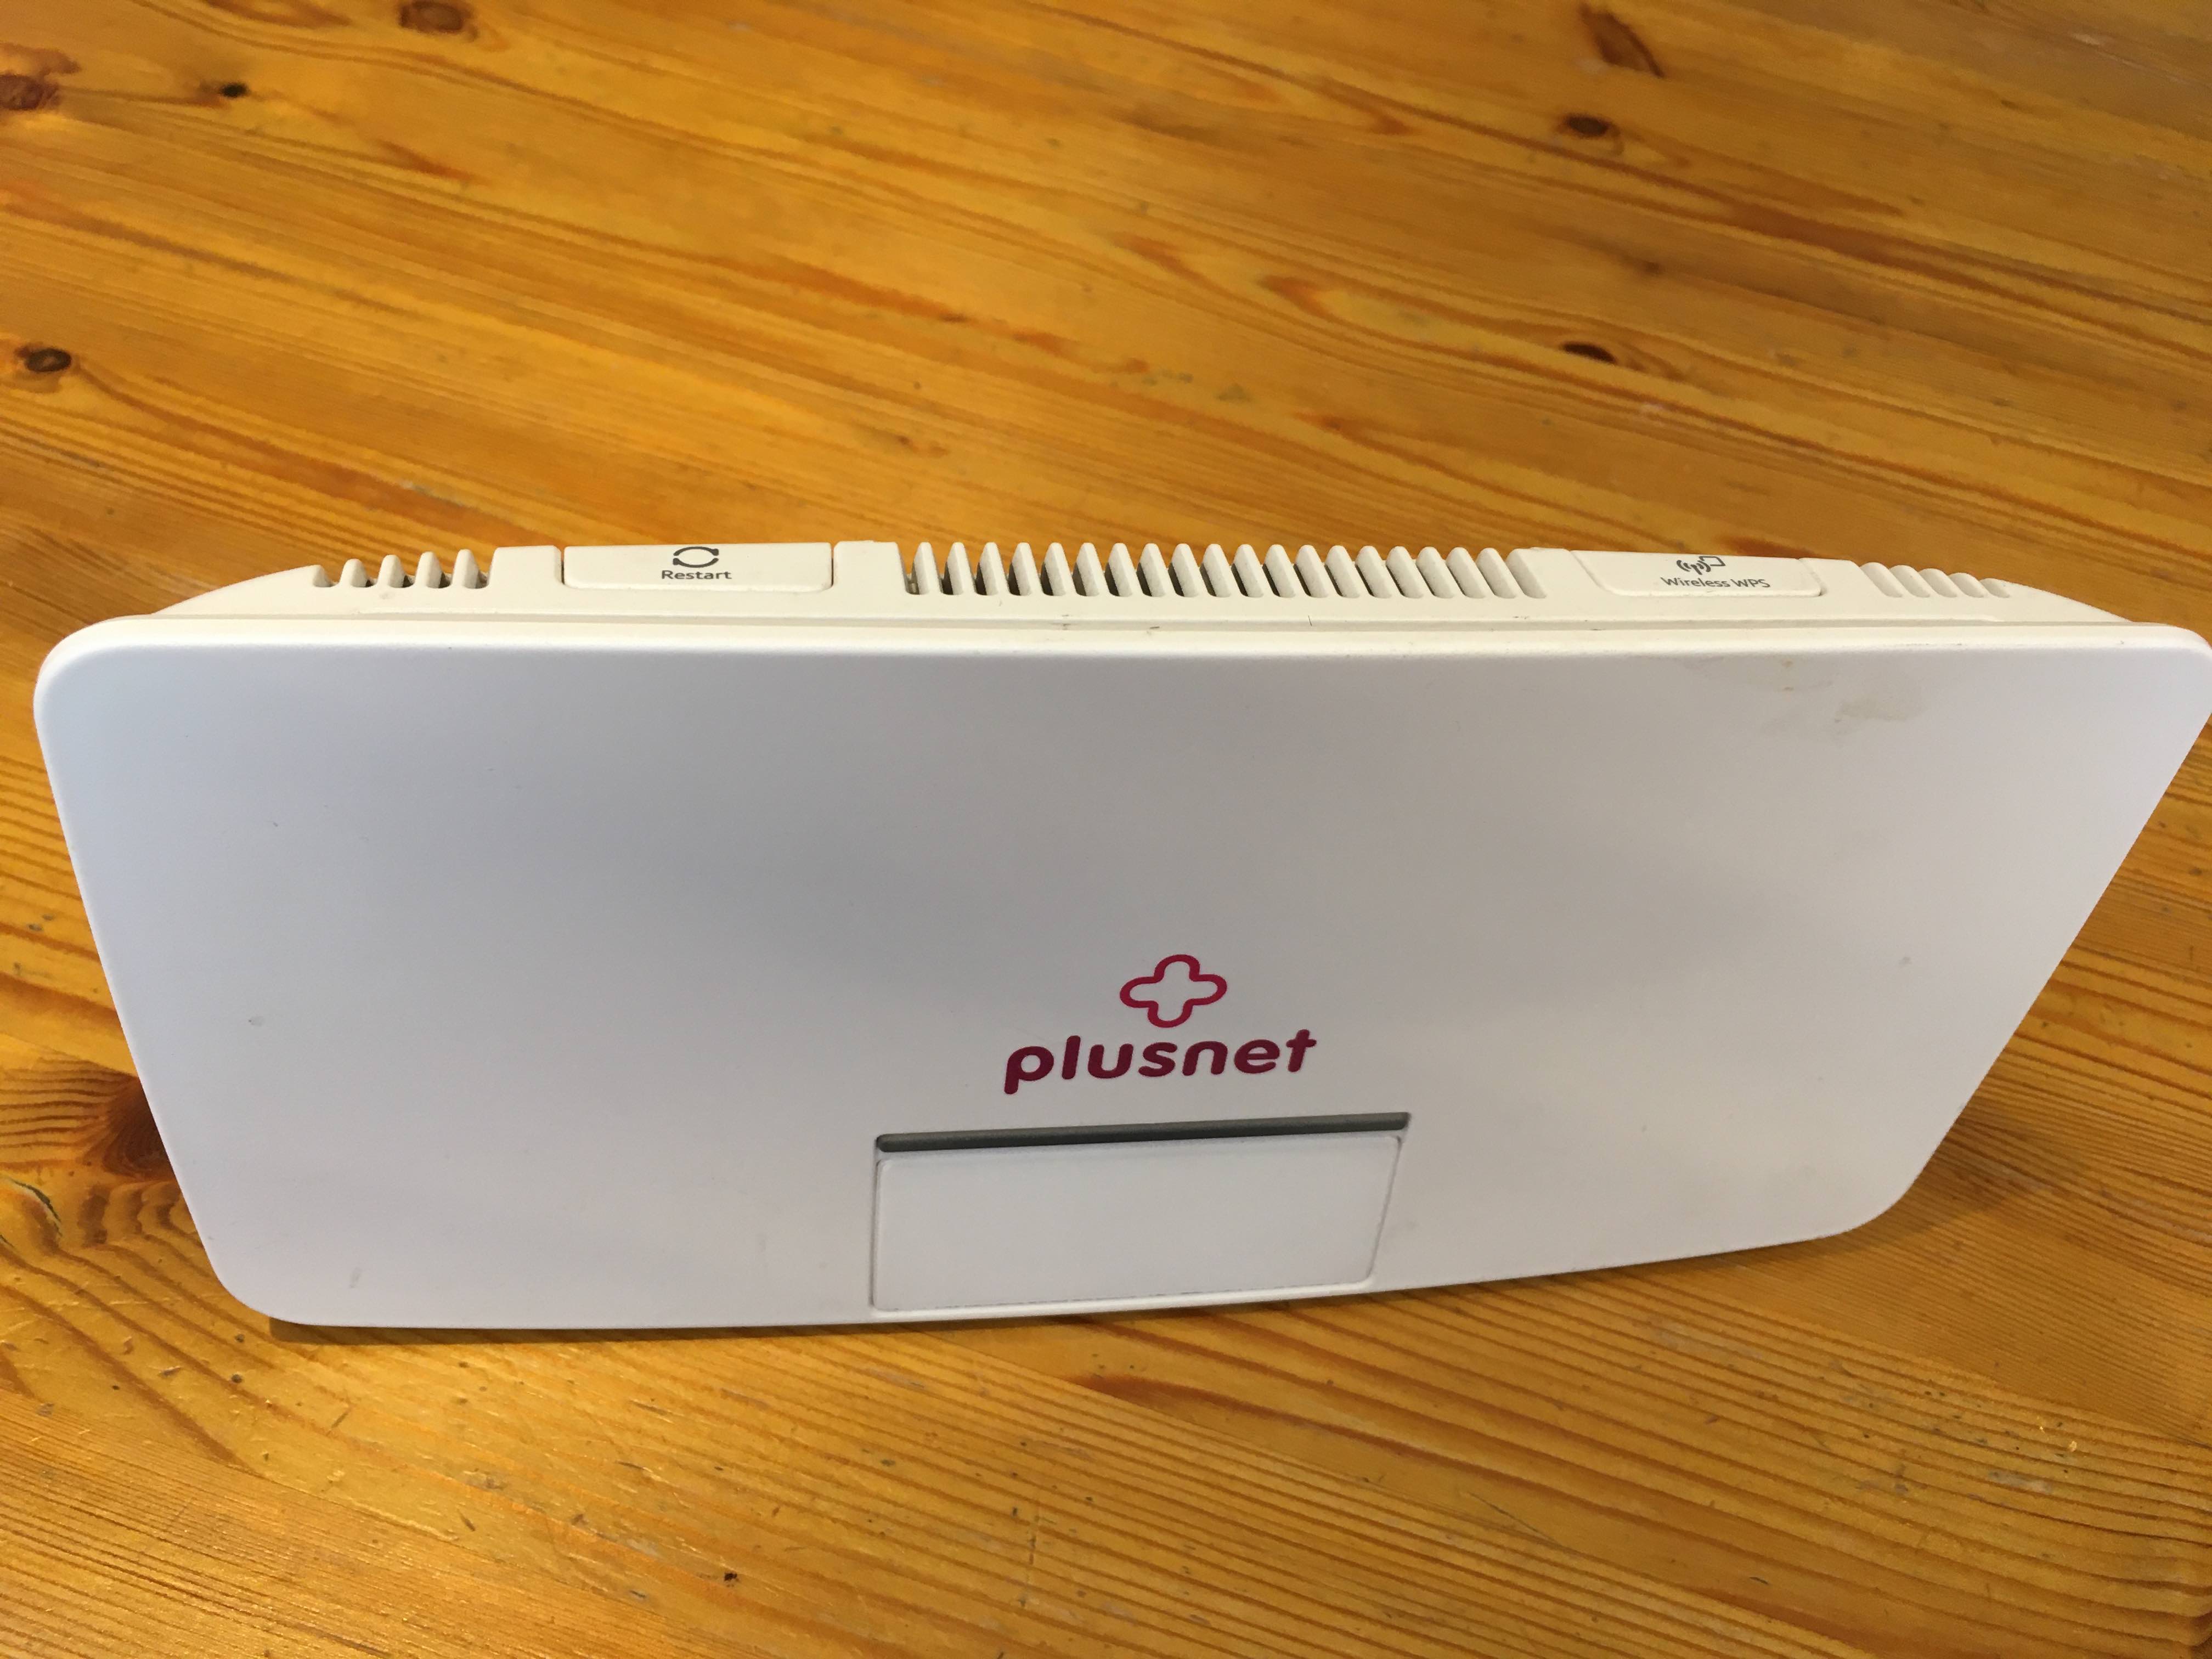 The PlusNet router